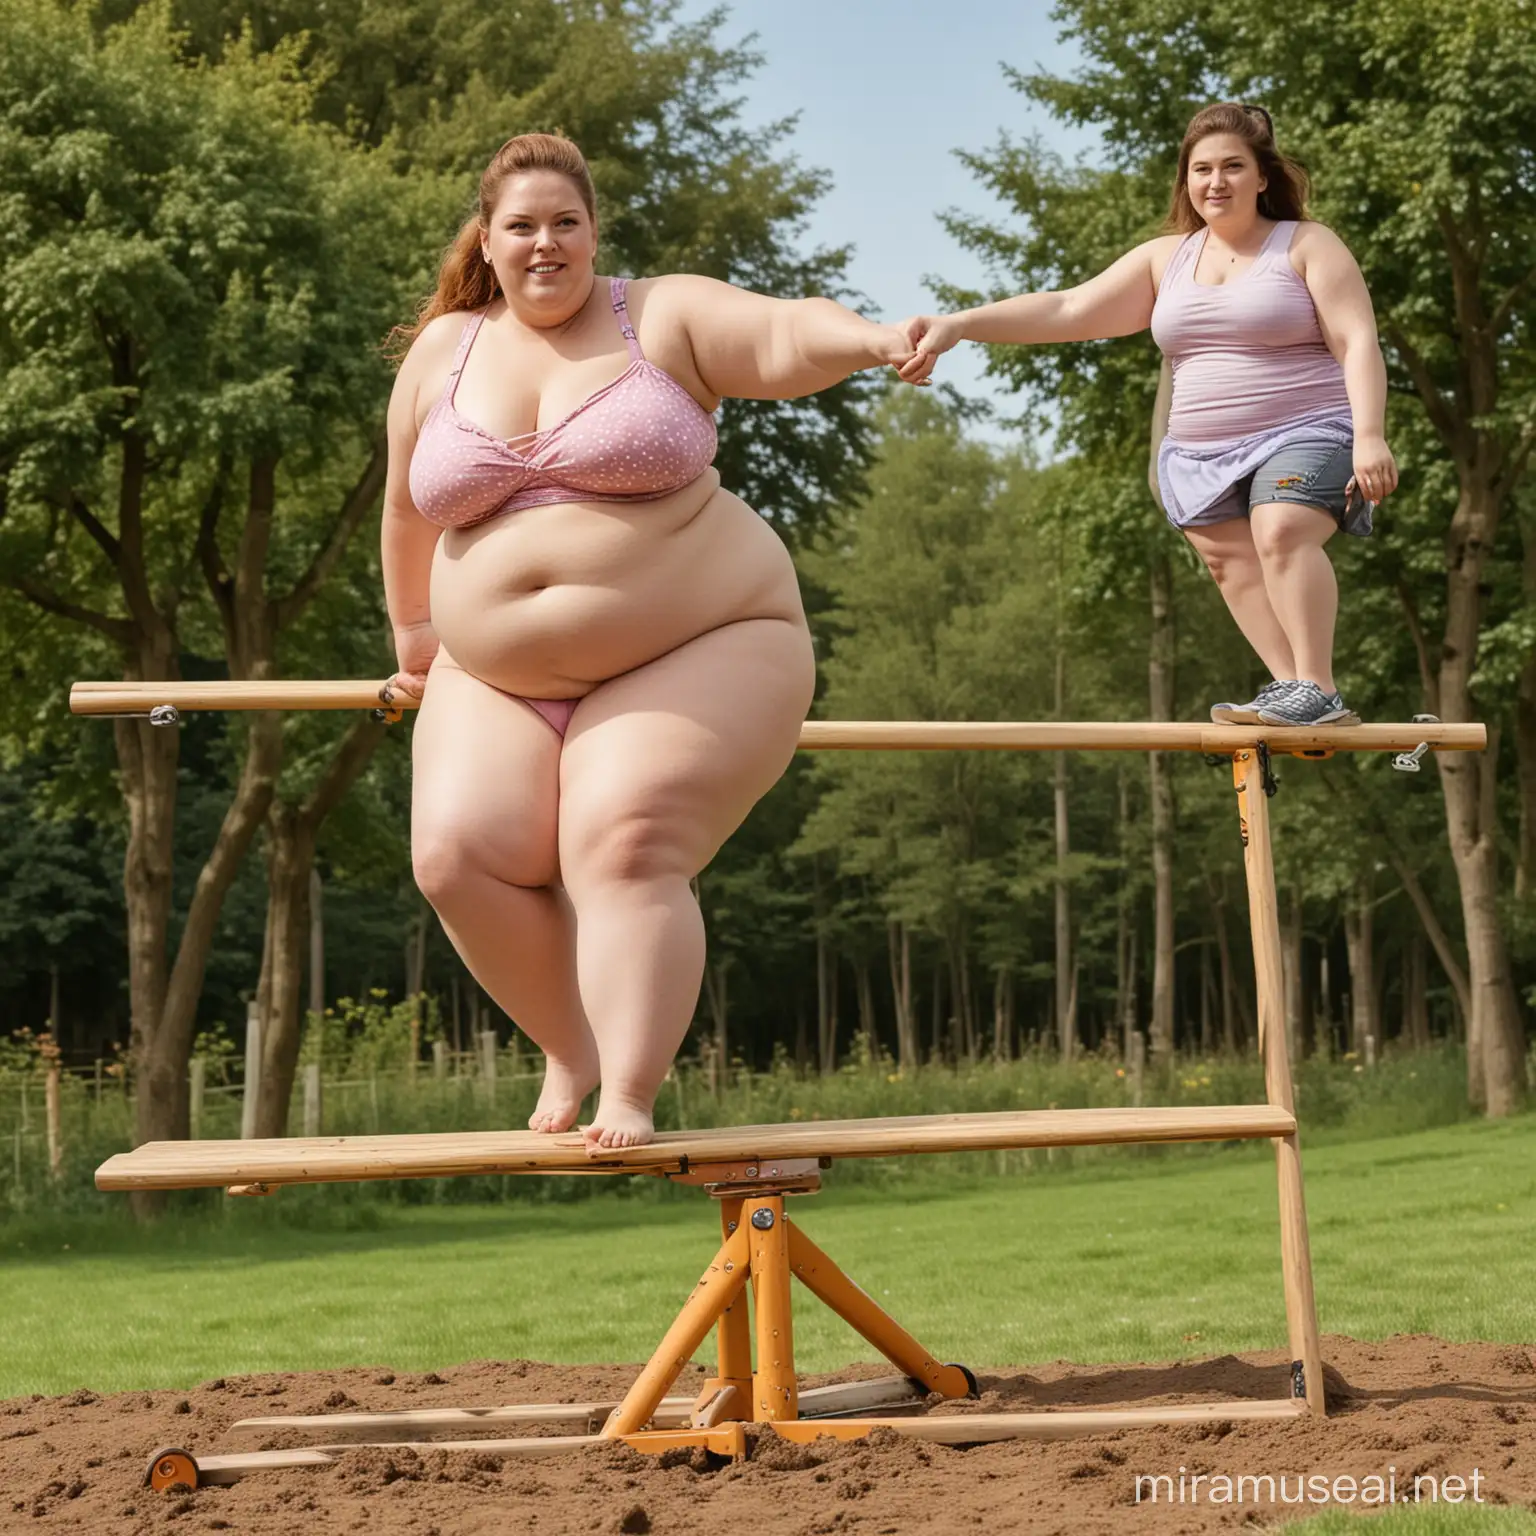 A very fat woman was playing seesaw with a thin man

with women in the top position